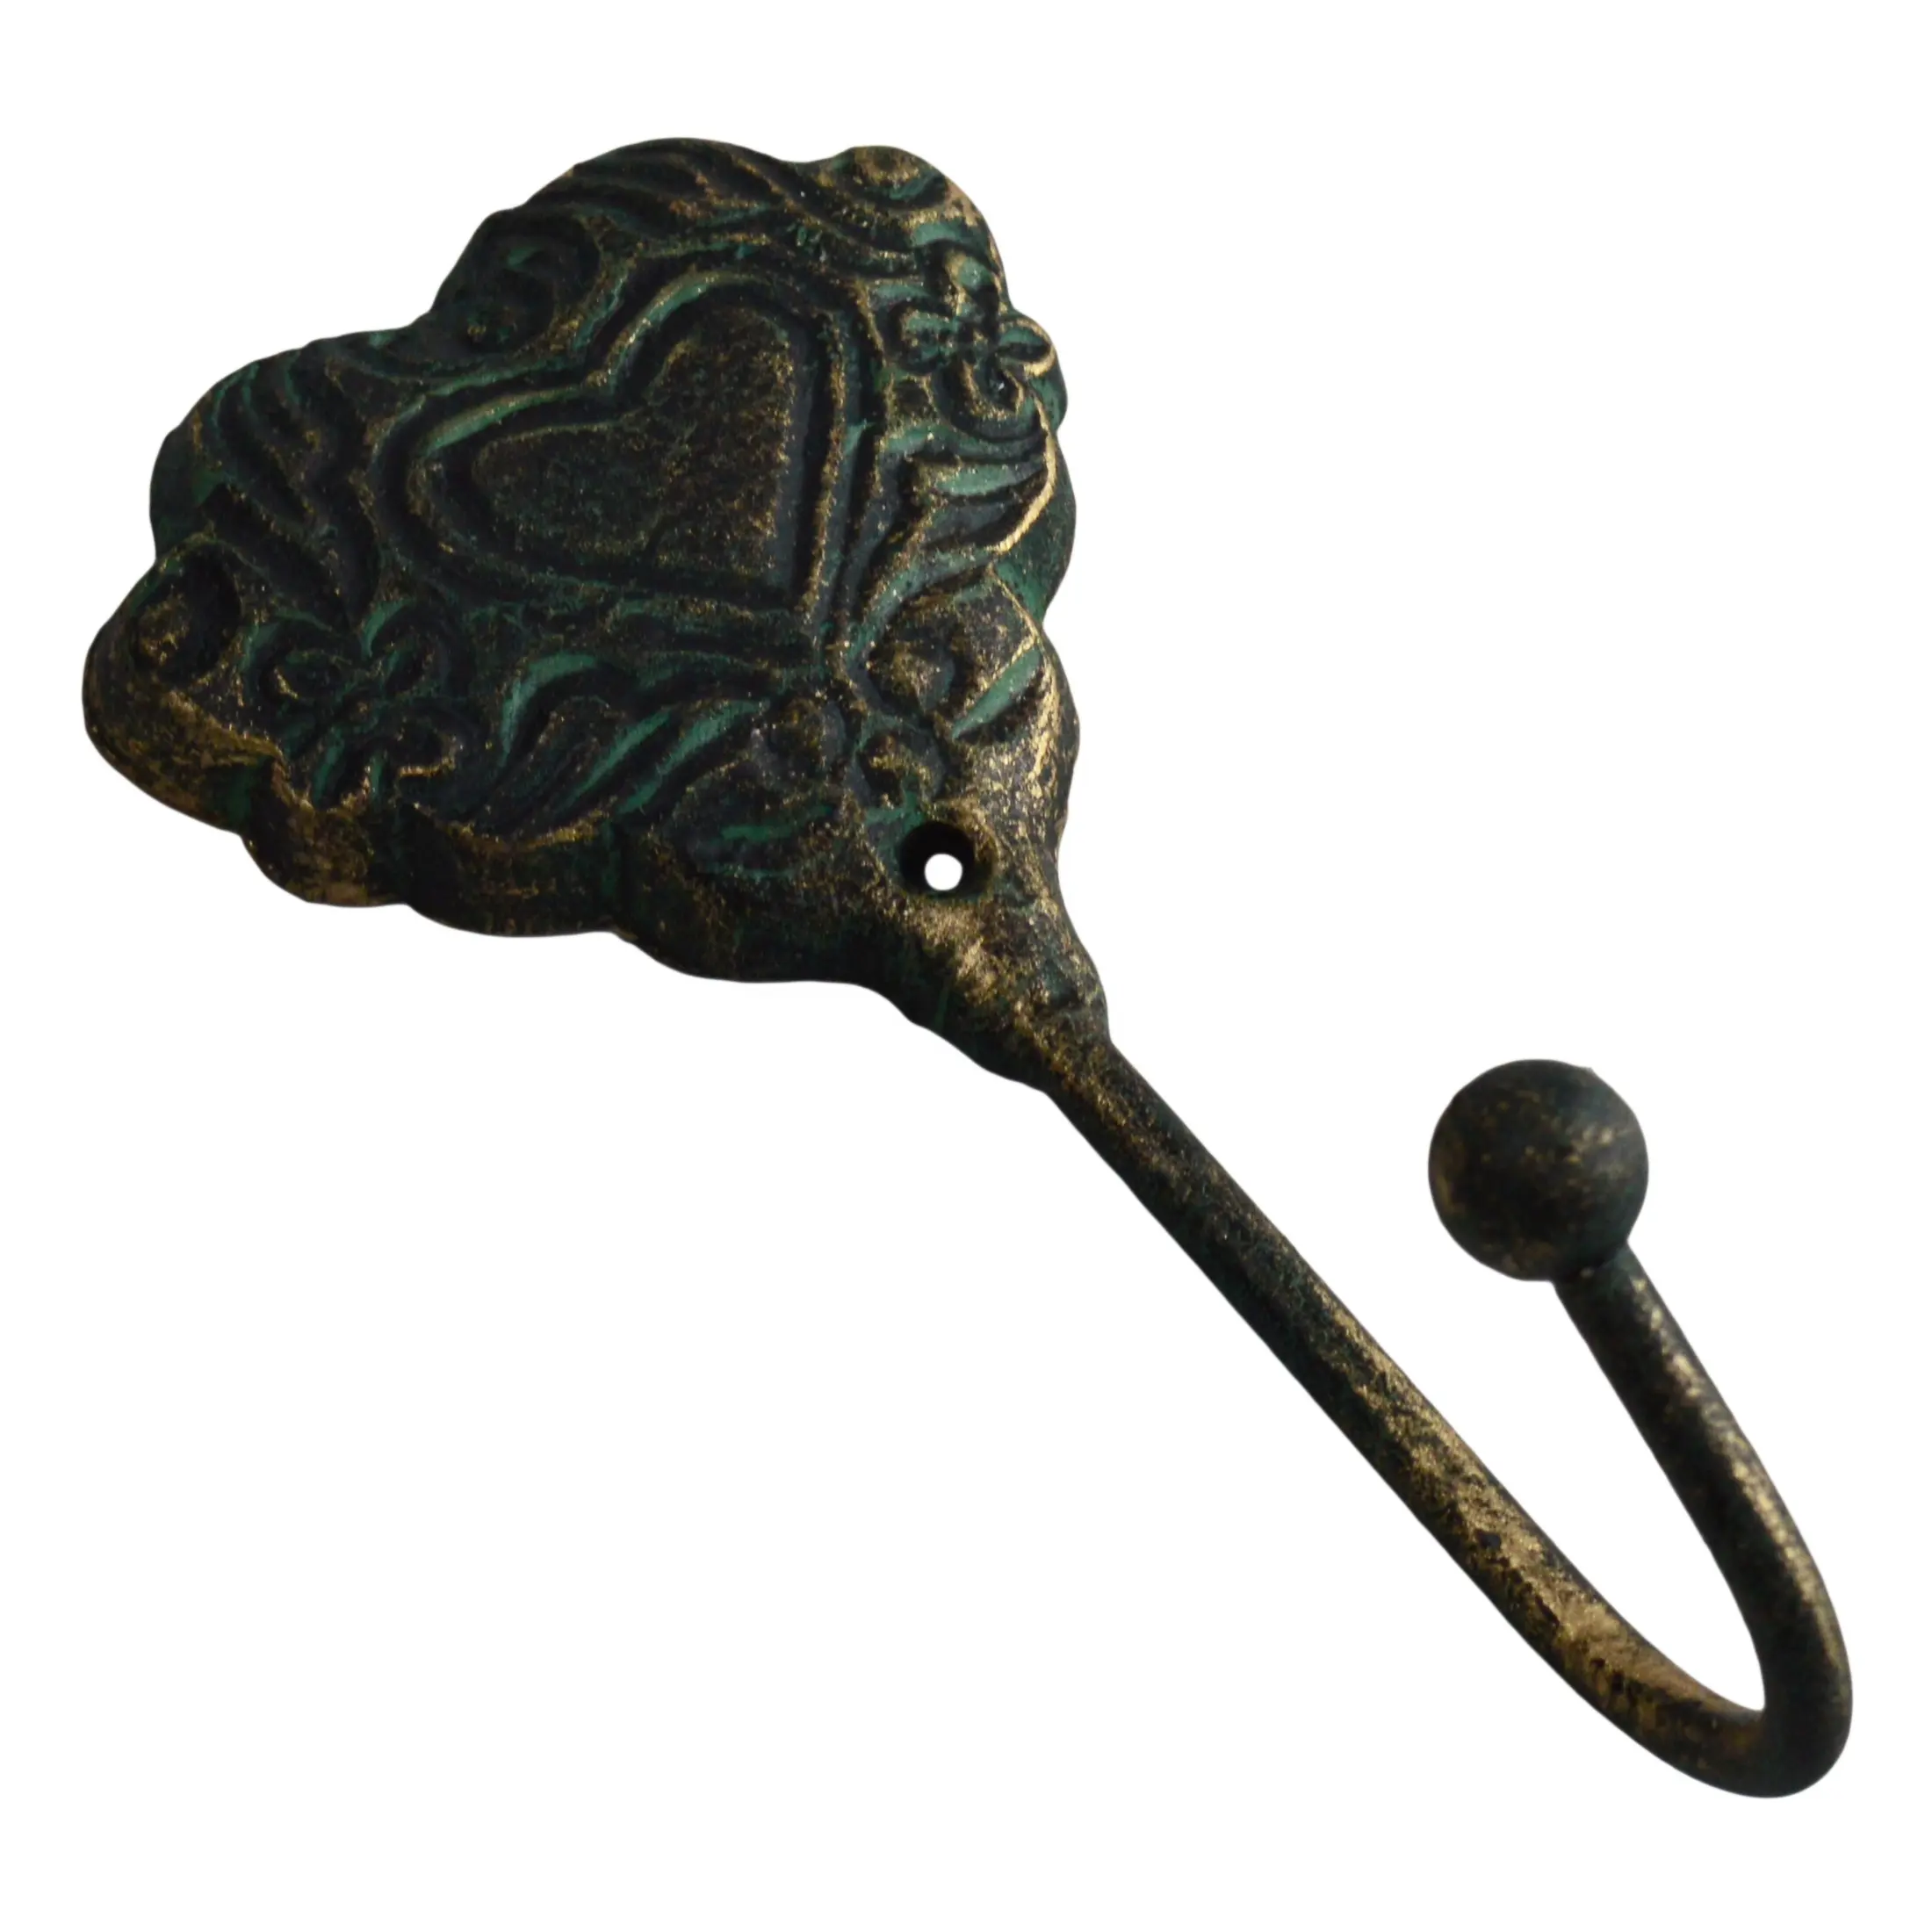 Old Design Wall Hooks With Industrial Quality Cast Iron Metal Cloths Hooks Best For Indoor Bed Room Wall Decorative Design